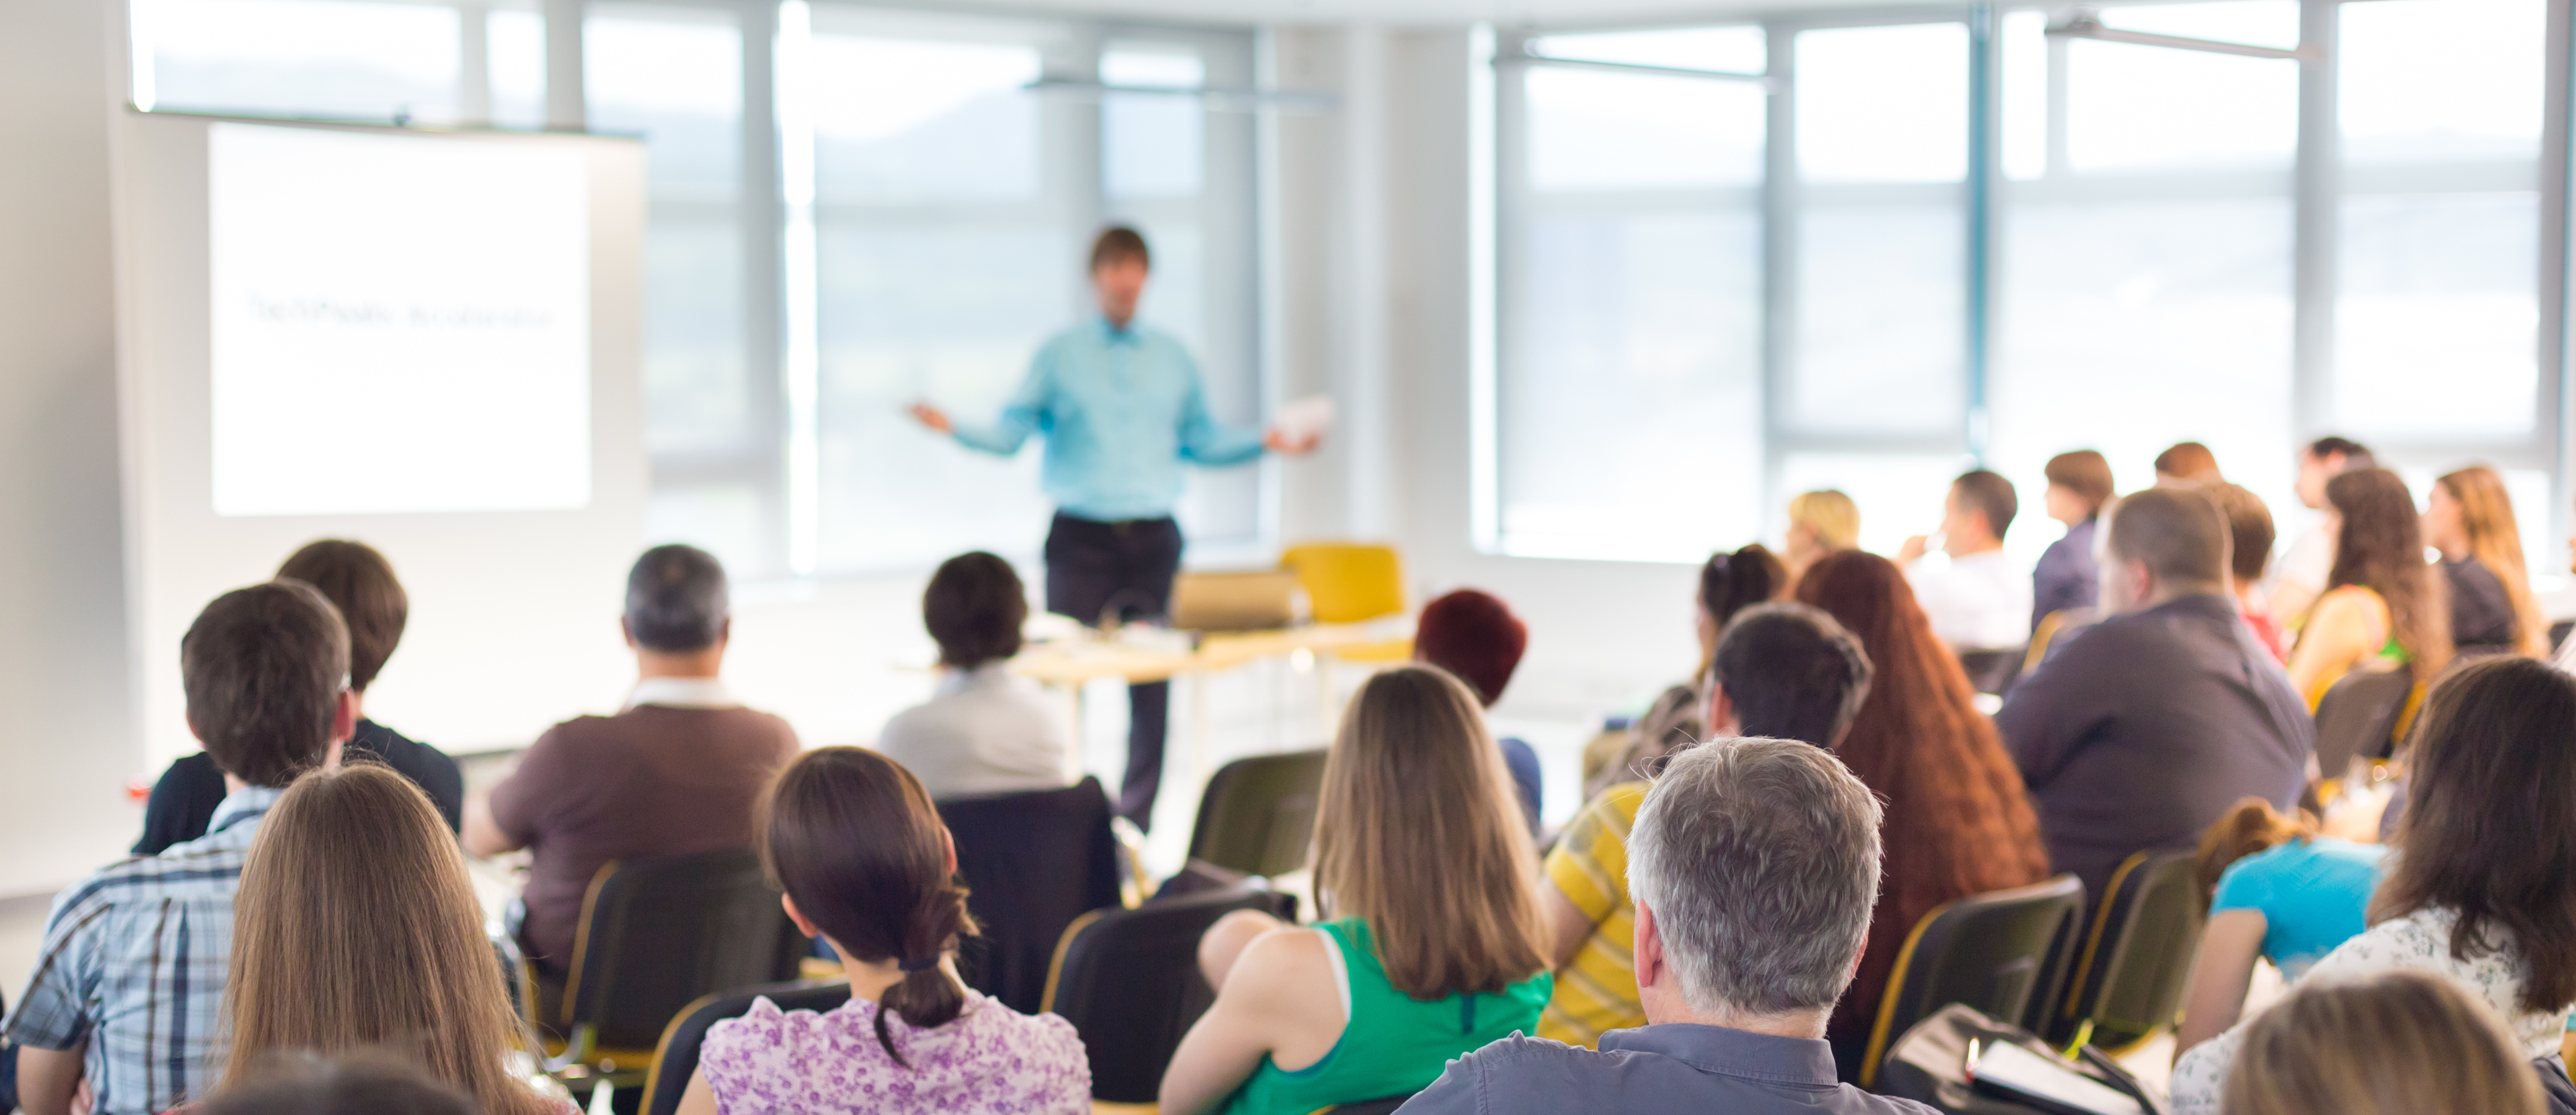 Speaker-Giving-Talk-Business-Meeting-Audience-in-conference-hall-iSpeak